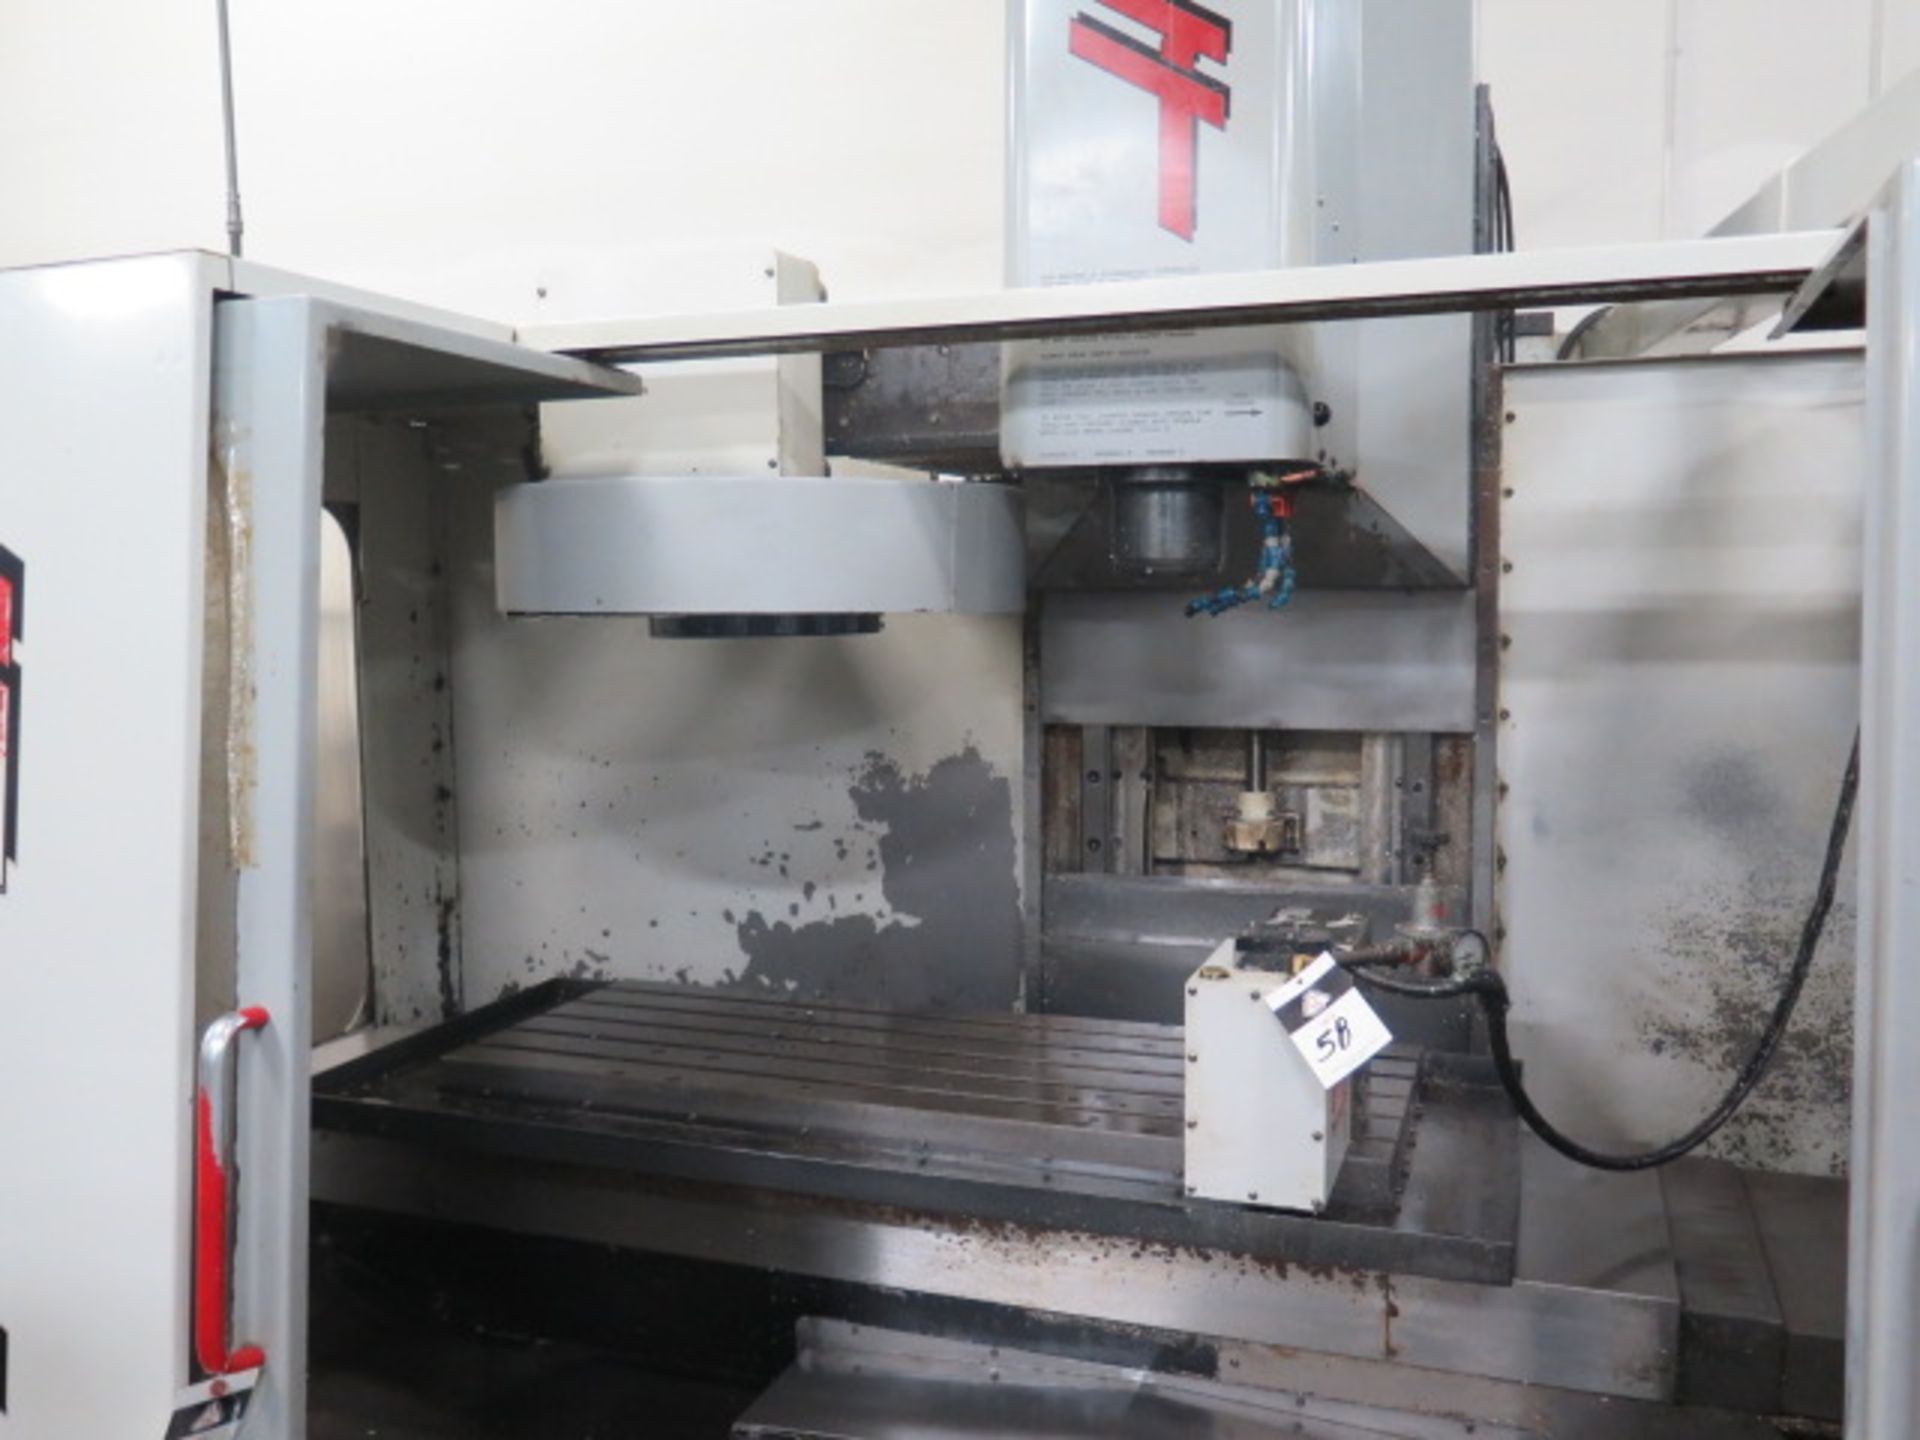 1999 Haas VF-3 4-Axis CNC VMC s/n 17438 w/ Haas Controls, 20-Station ATC, 7500 RPM, SOLD AS IS - Image 7 of 15